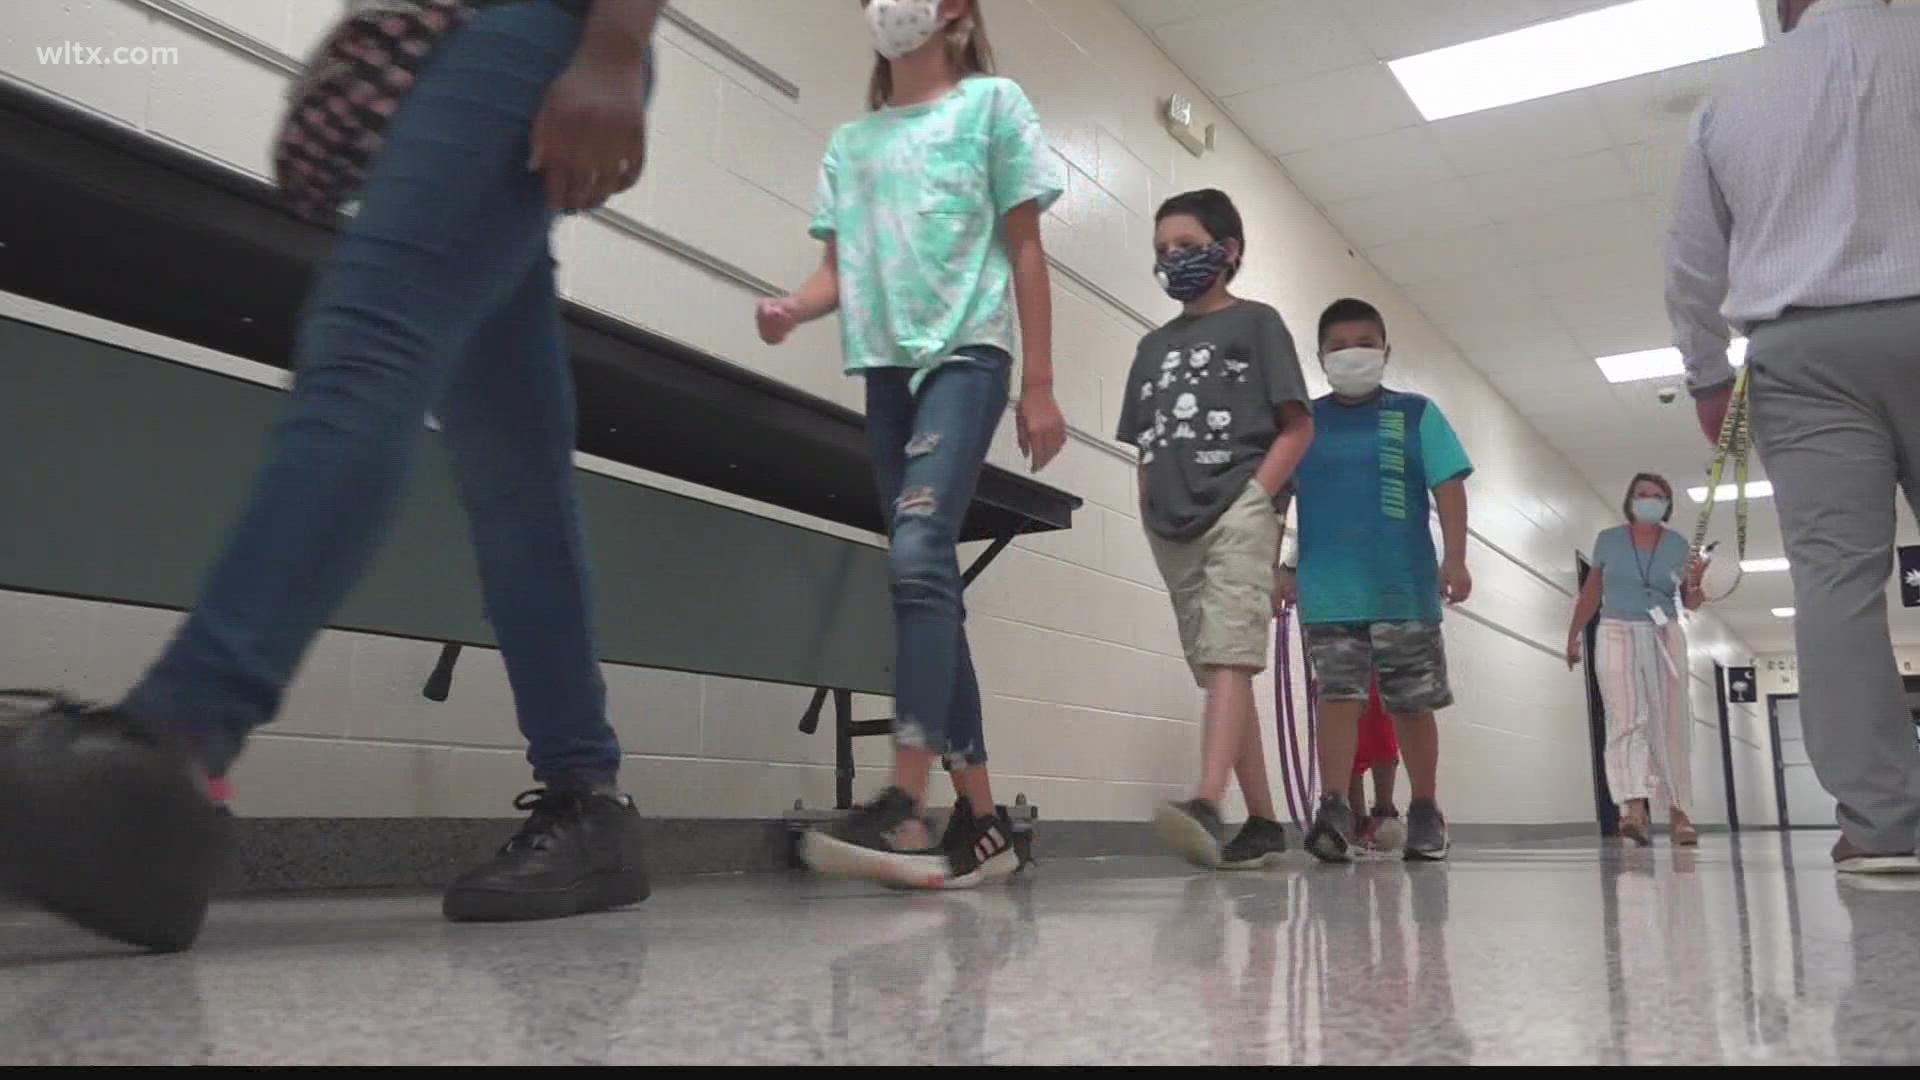 While masks and vaccinations can't be mandated in South Carolina, DHEC and the state school superintendent are urging both among students, staff and others.